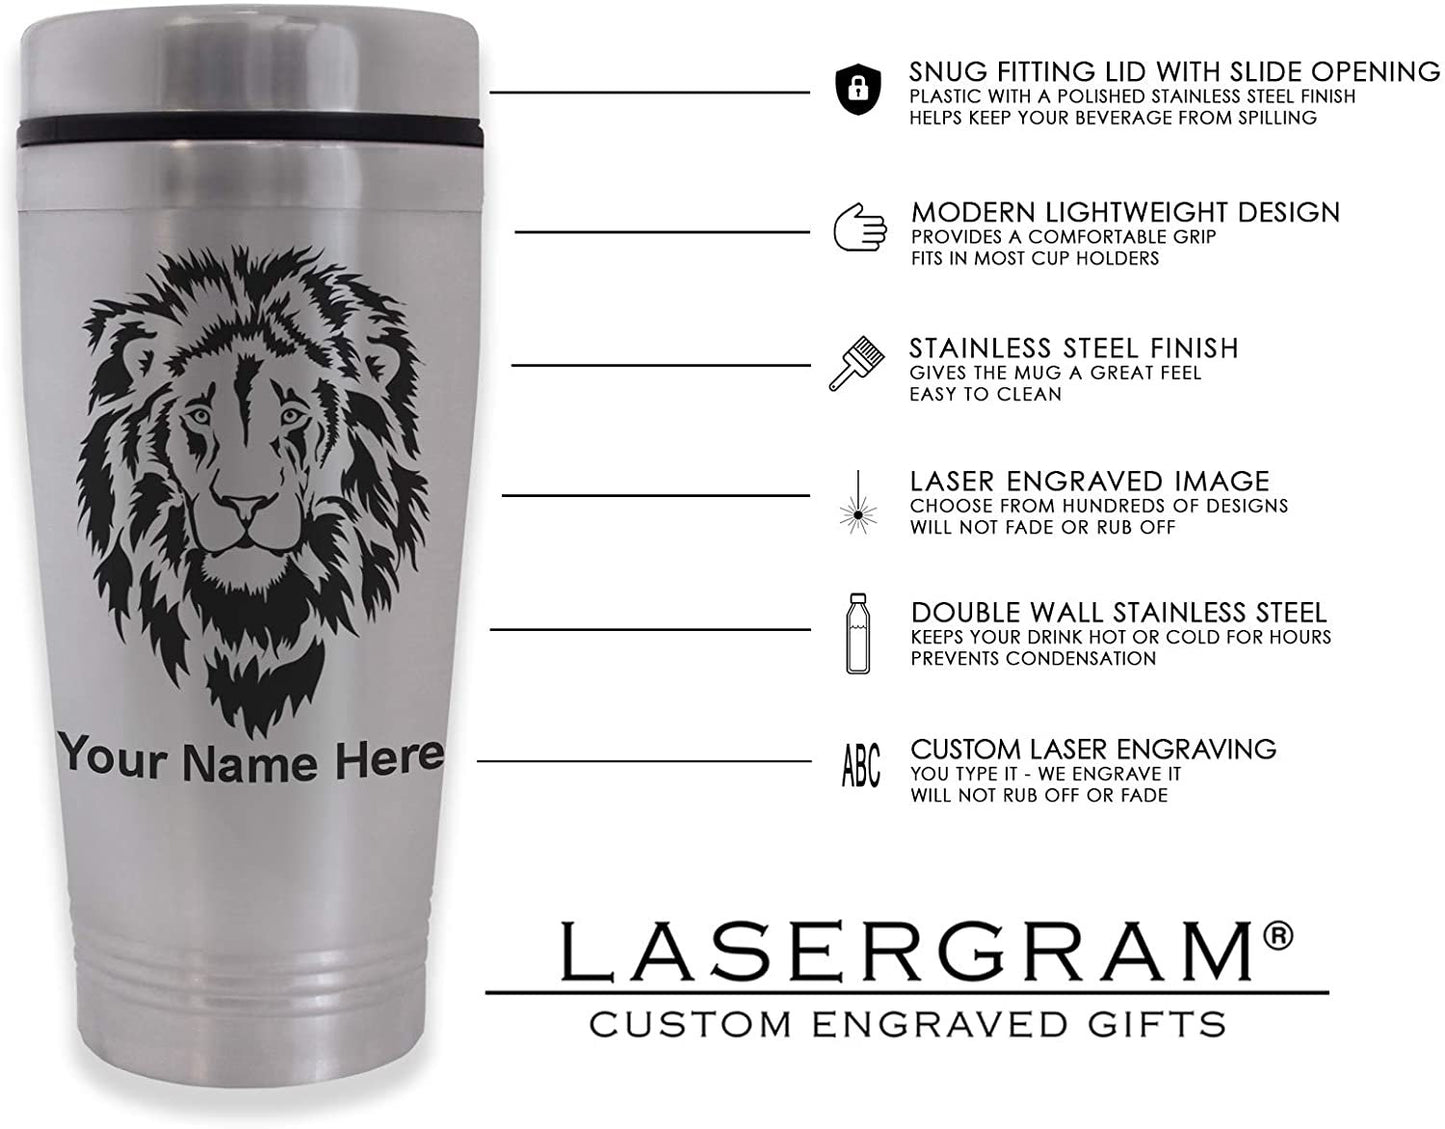 Commuter Travel Mug, Snowboarder Man, Personalized Engraving Included